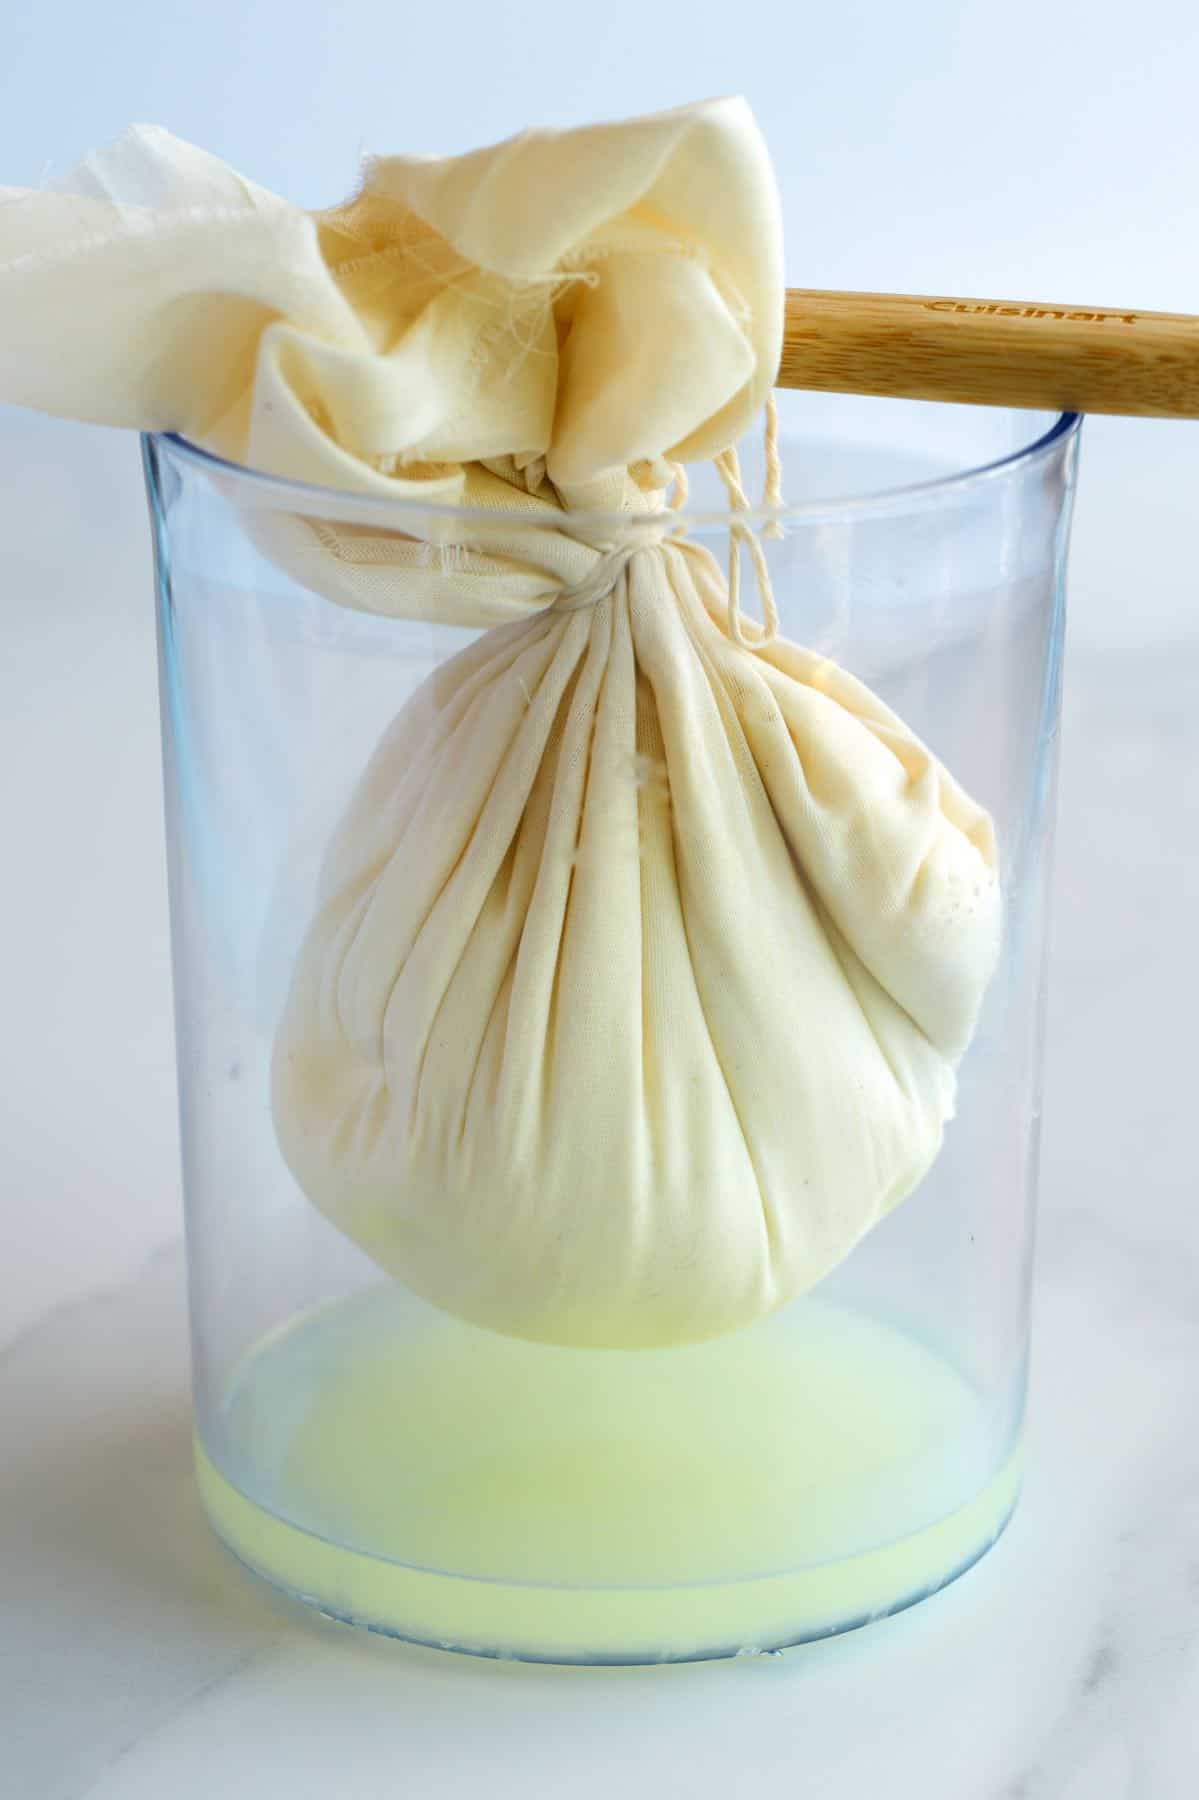 How to make Labneh - Strained salted yogurt in cheesecloth with whey.